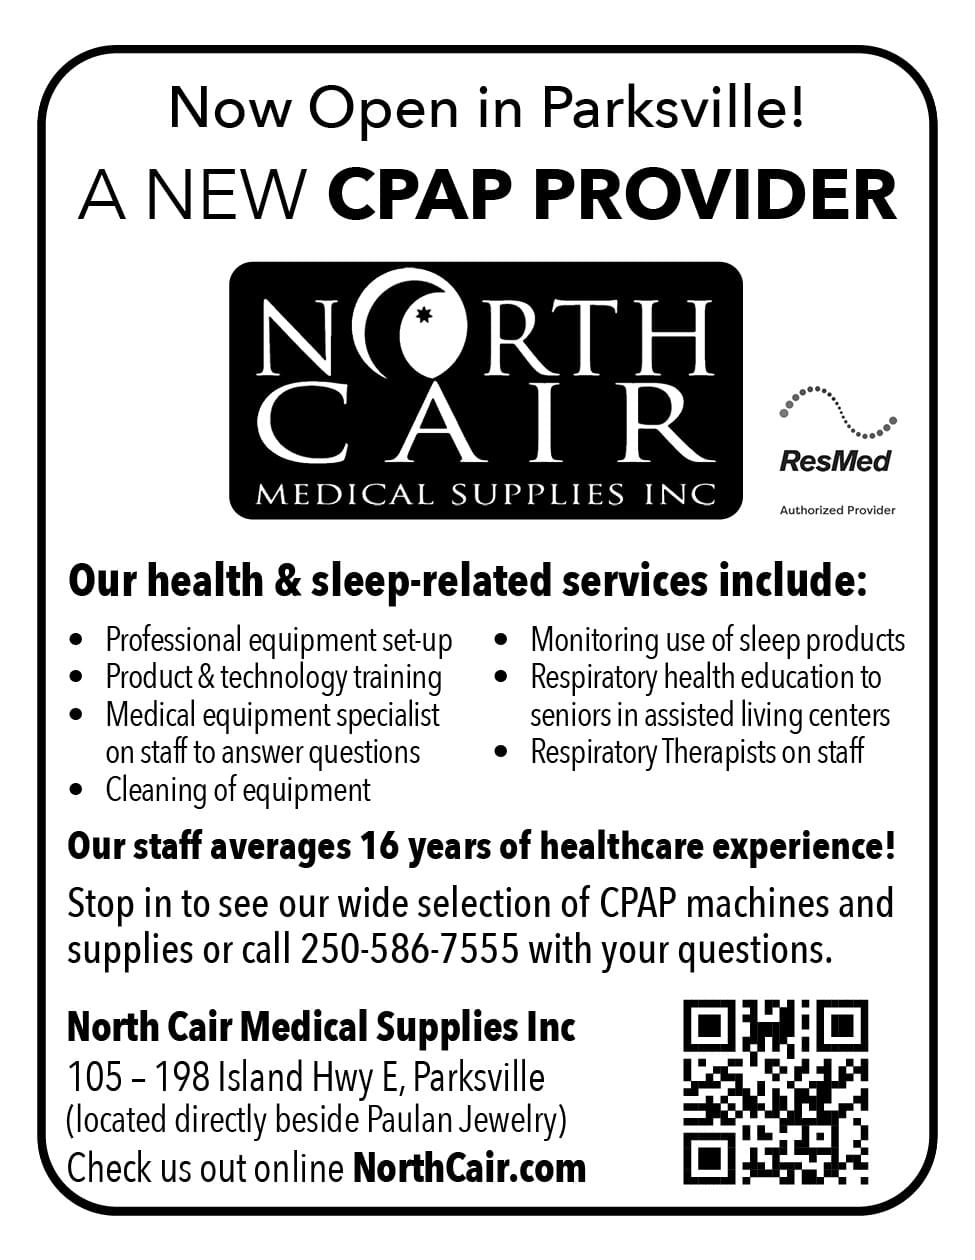 North Cair CPAP Provider in Parksville BC Ad in Coffee News